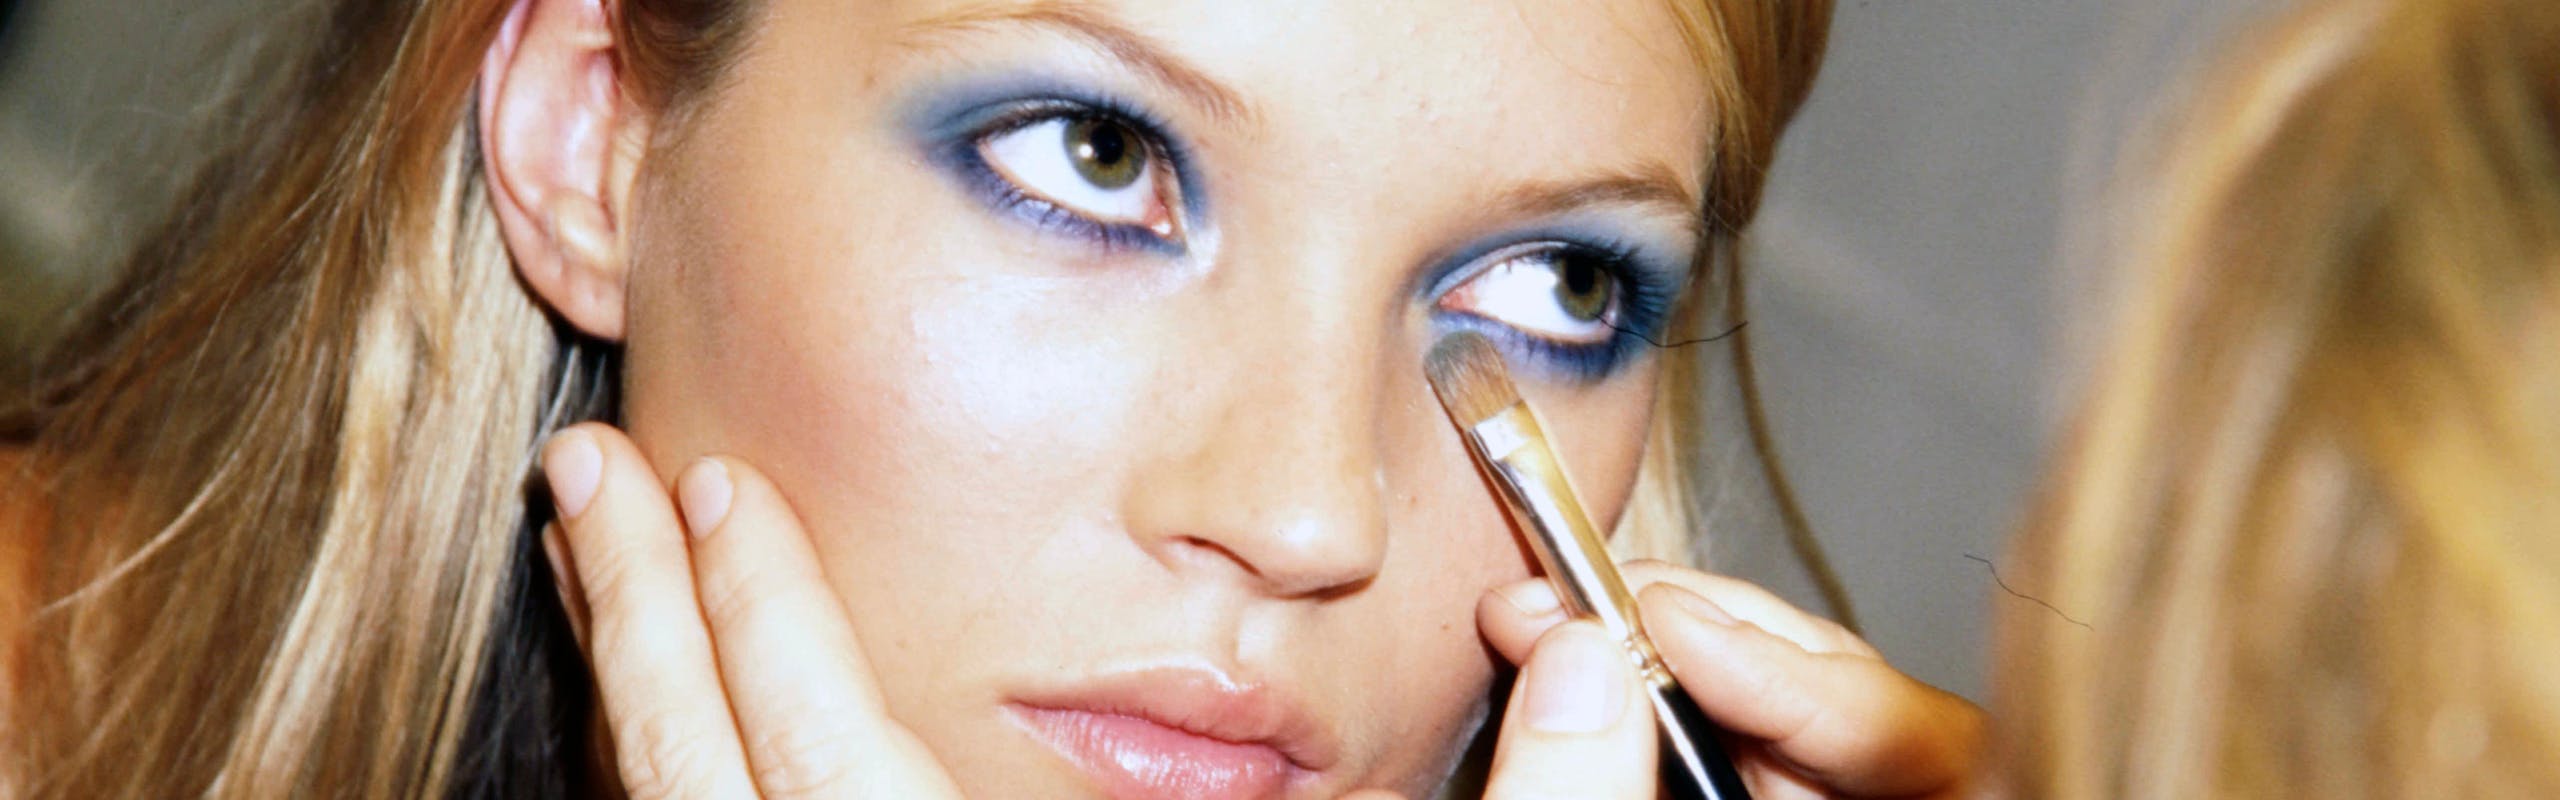 blue eyeshadow color trend: Kate Moss, Backstage at Gucci's Spring/Summer 1996 Ready-to-Wear show.